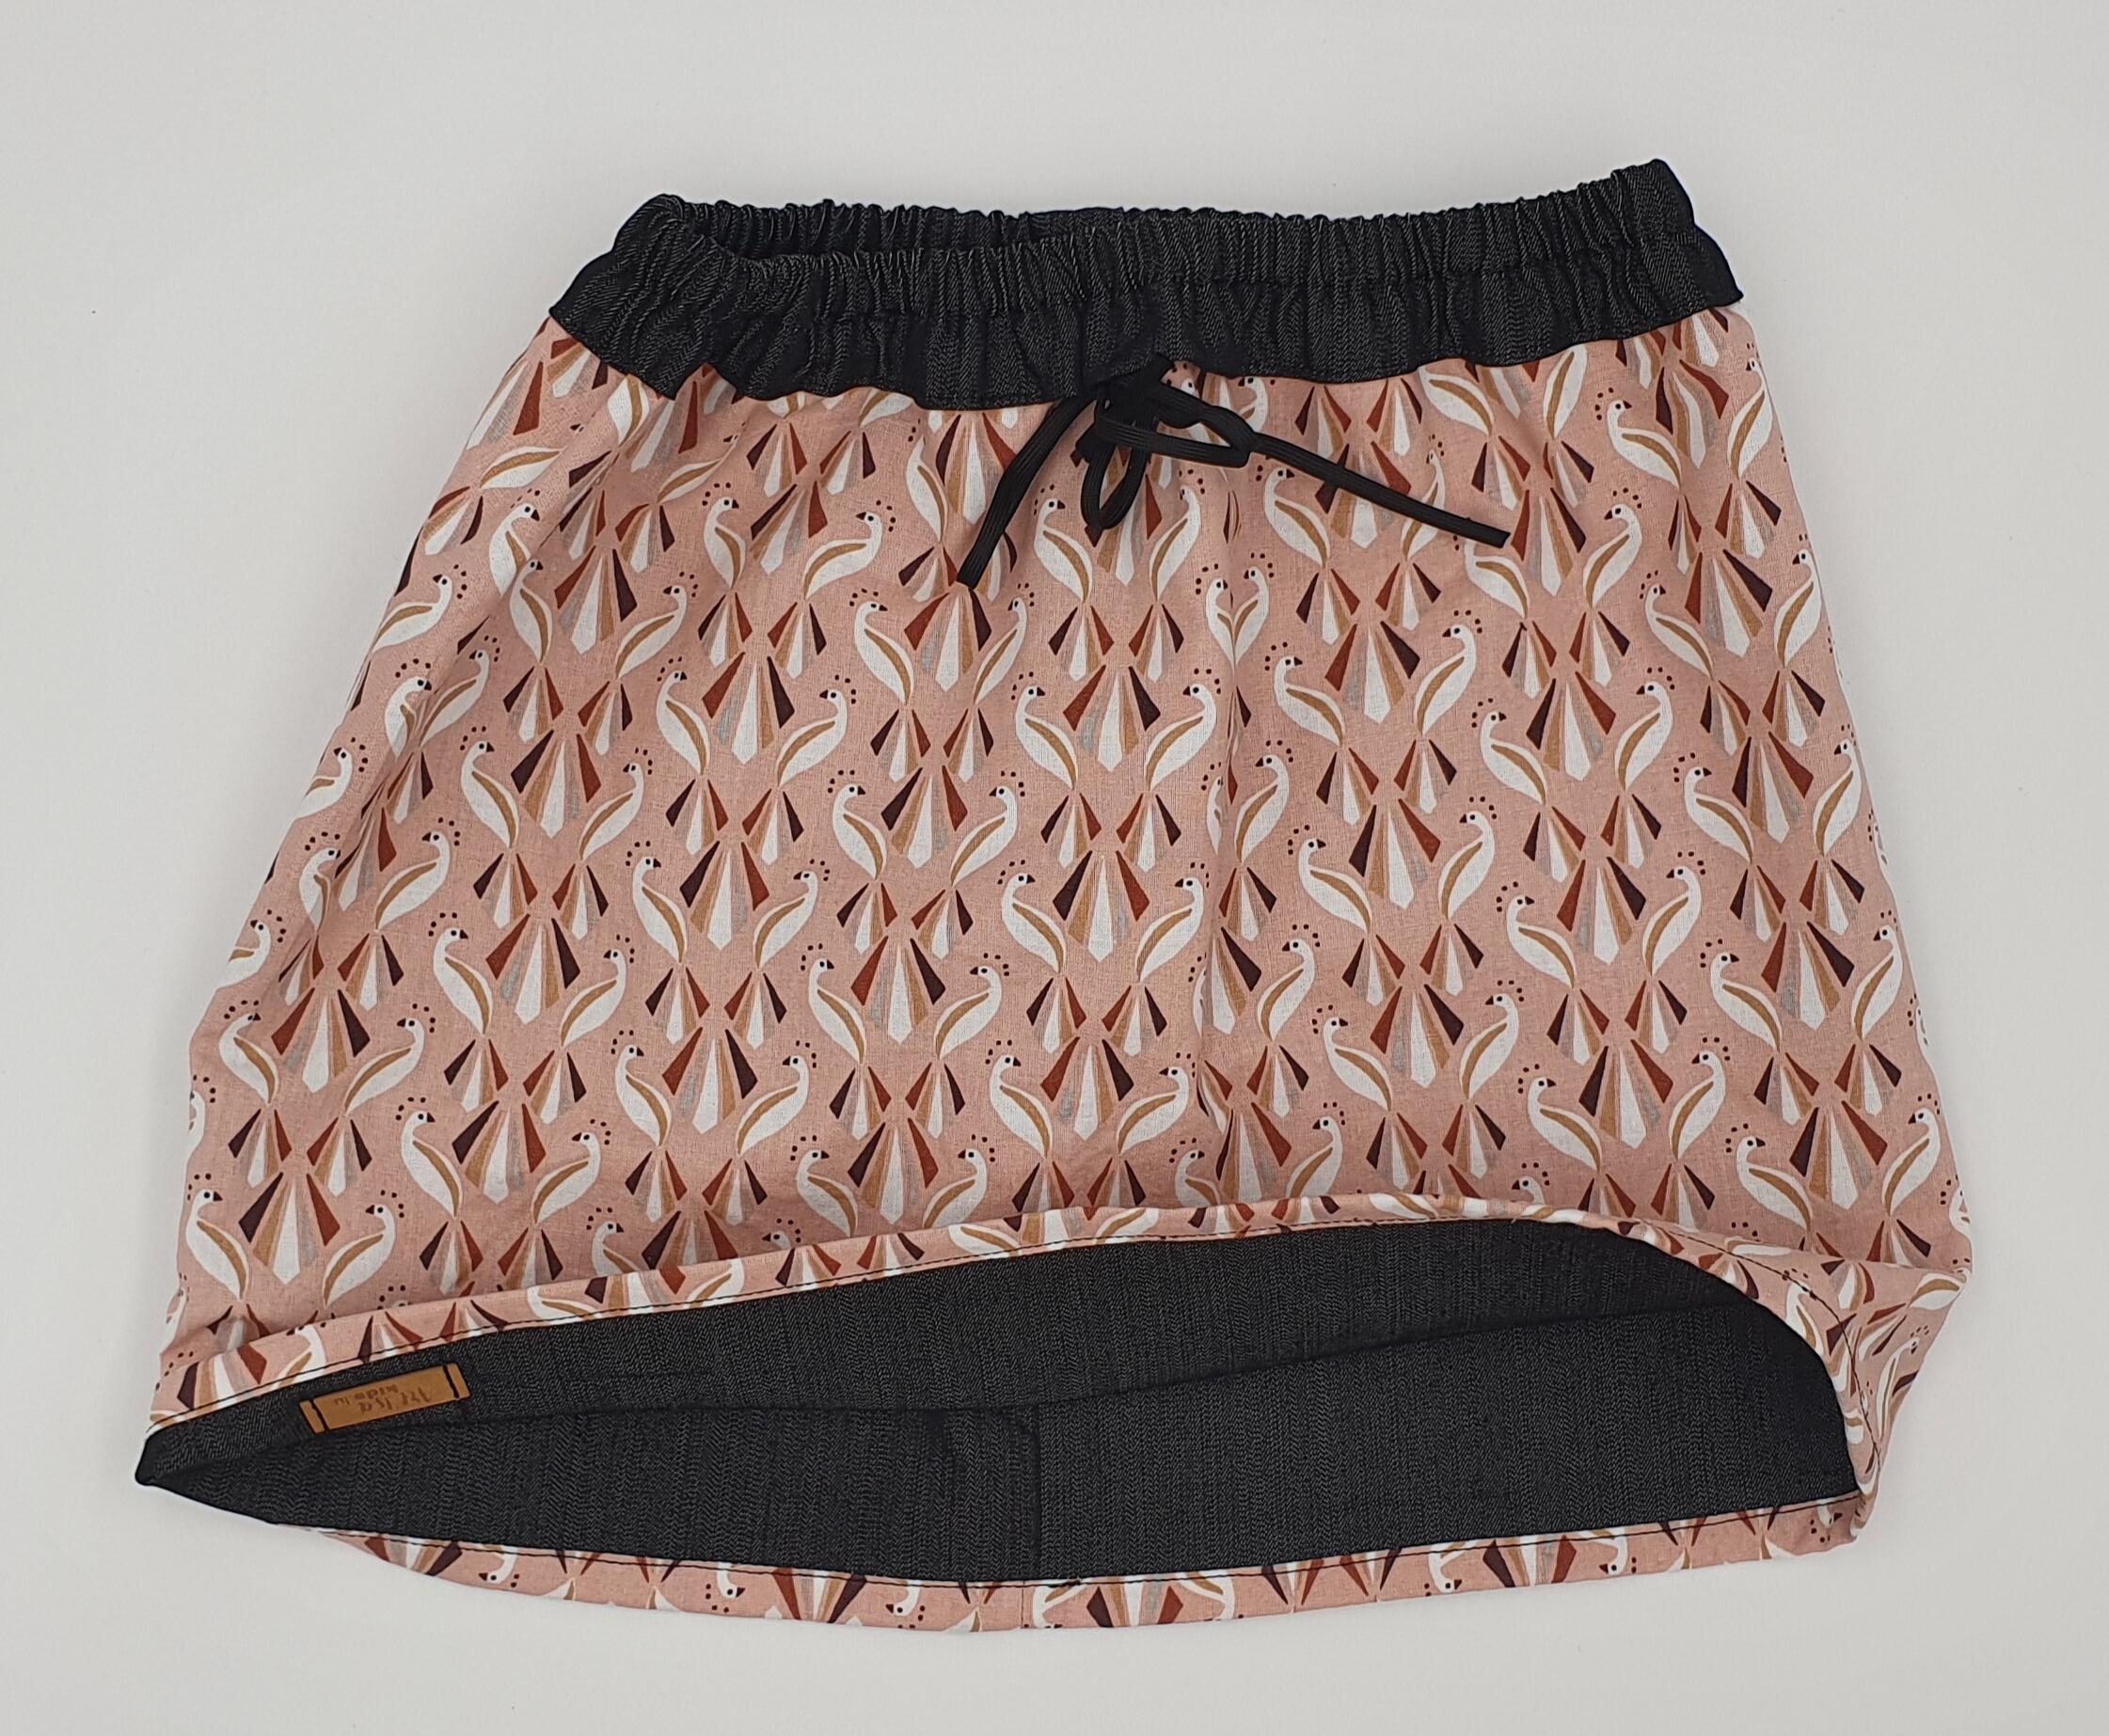 Reversible and evolving child skirt "Paons